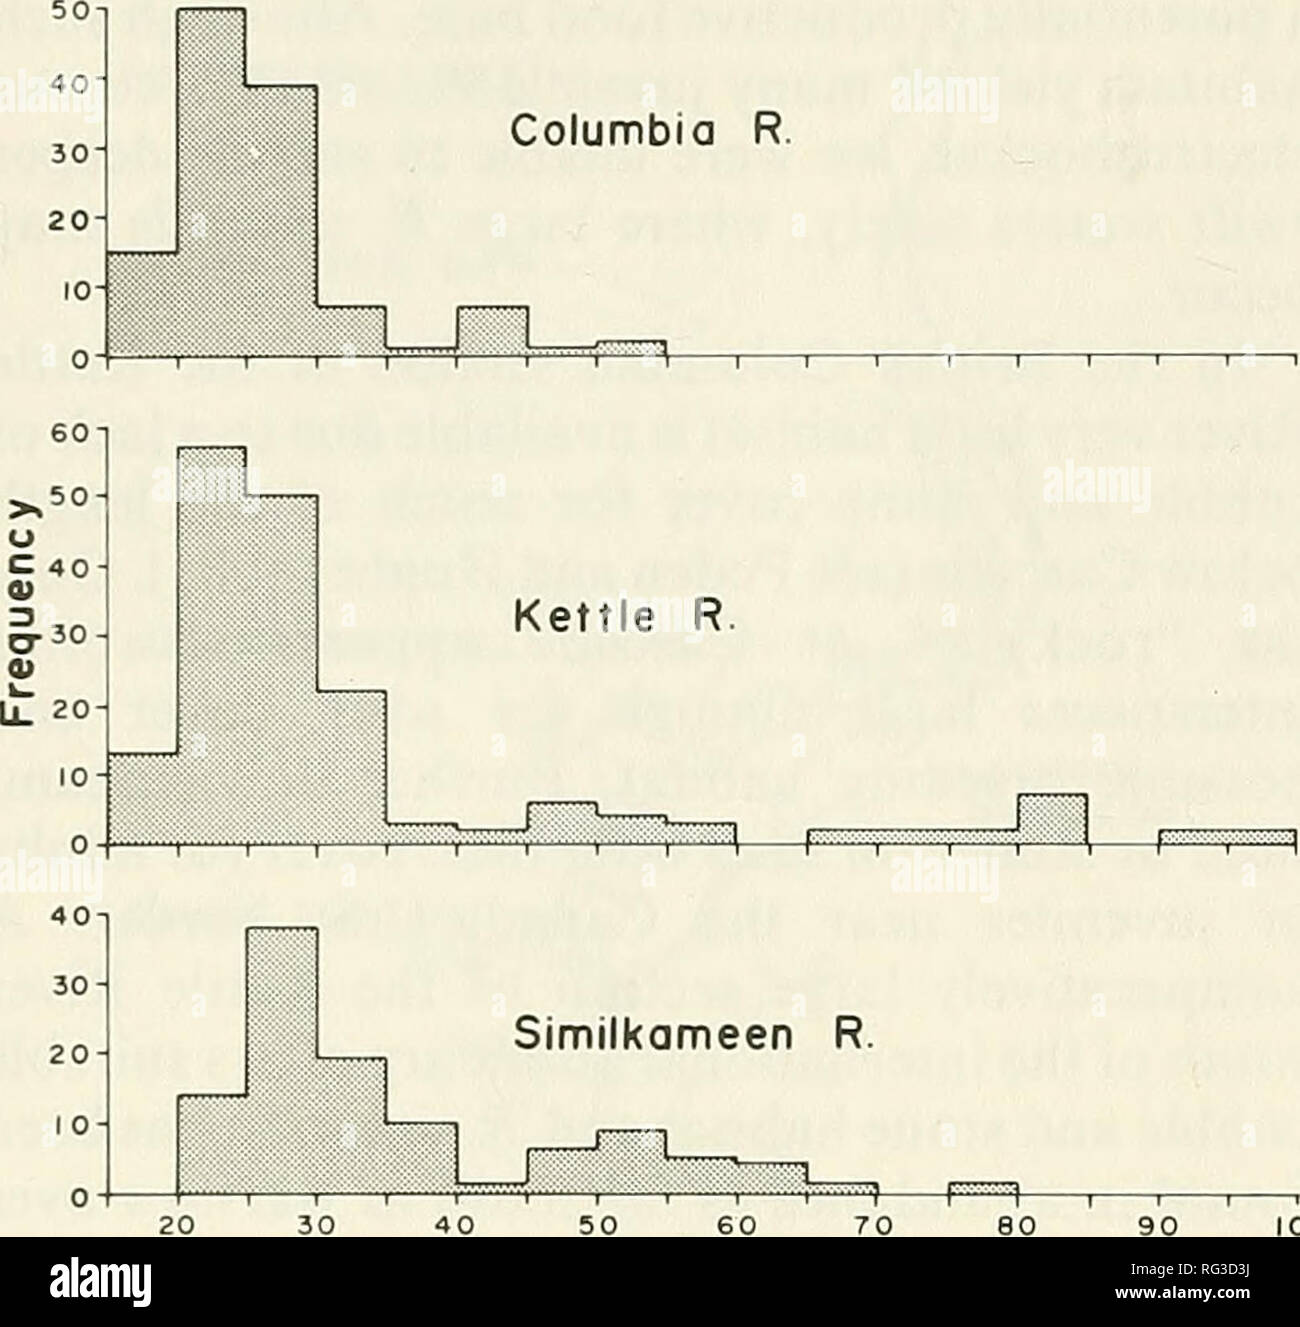 . The Canadian field-naturalist. 198 The Canadian Field-Naturalist Vol. 103. Standard Length (mm) Figure 5. Length frequency histograms based on fish collected during spring and fall in the Columbia River, B.C., and in upper Washington and Canadian reaches of the Kettle and Similkameen spring and summer if similar to that of R.falcatus, R. cataractae (Carlander 1969) and R. osculus (Wydoski and Whitney 1979; Peden and Hughes 1981). The occurrence of the species near Castlegar, Trail and the reservoirs of the Kootenay River suggests that the species can tolerate some degree of human disturbance Stock Photo